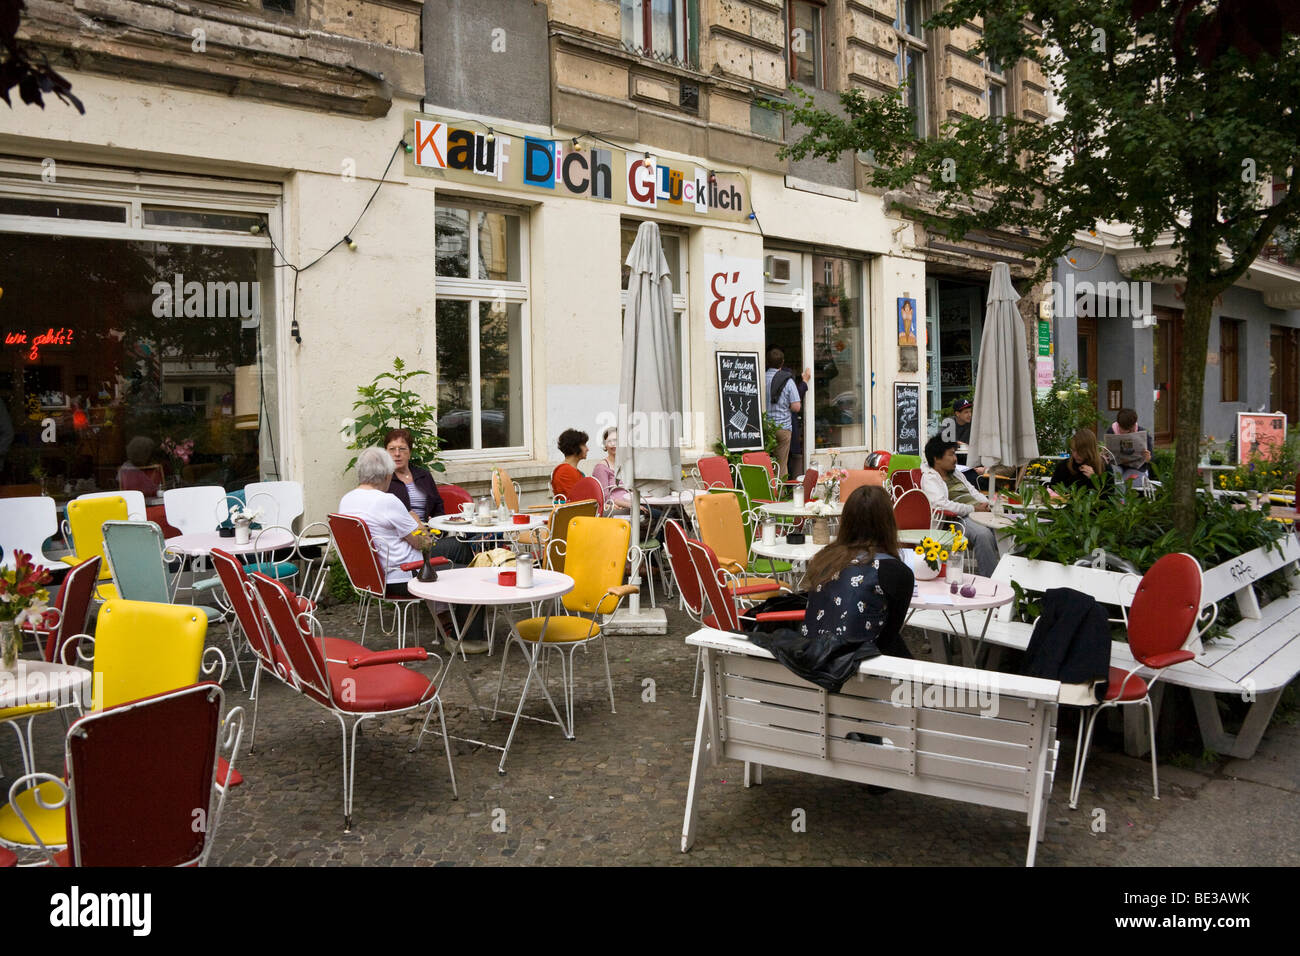 Kauf Dich Gluecklich, buy your happiness, a cafe in the Odeberger Strasse street, Prenzlauer Berg district, Pankow, Berlin, Ger Stock Photo